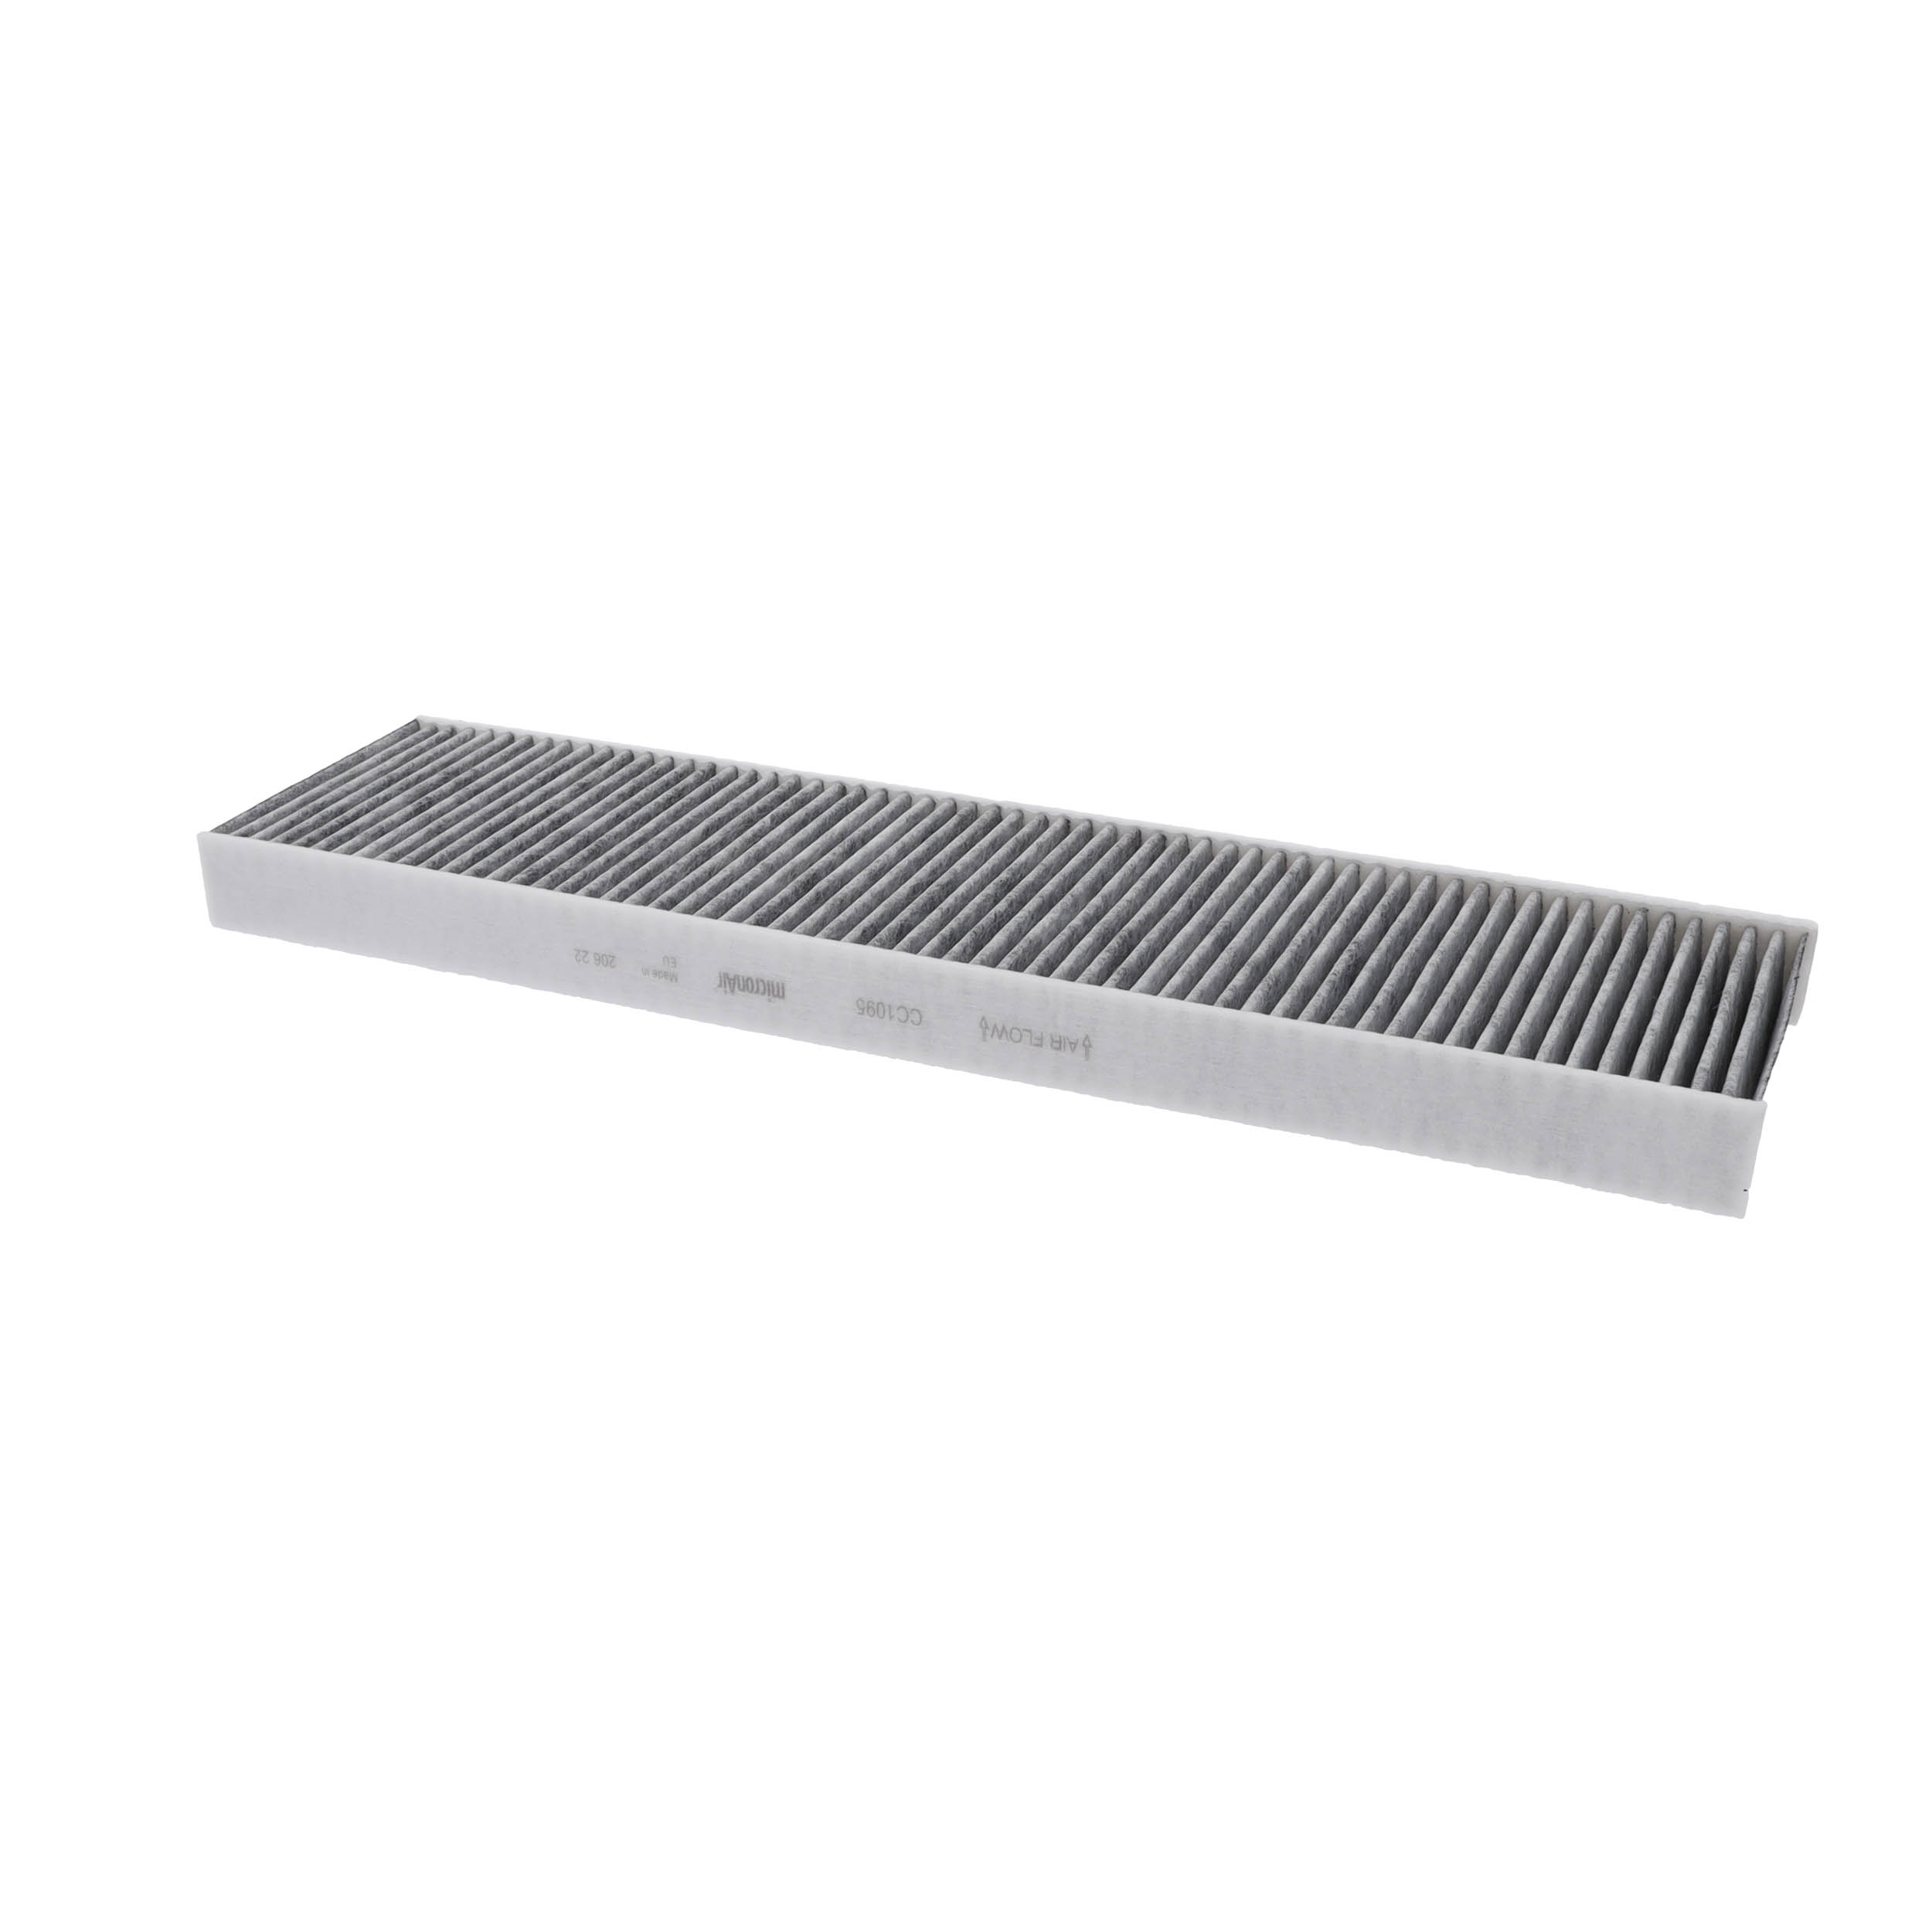 CORTECO Activated Carbon Filter, 460 mm x 118 mm x 30 mm Width: 118mm, Height: 30mm, Length: 460mm Cabin filter 21652853 buy